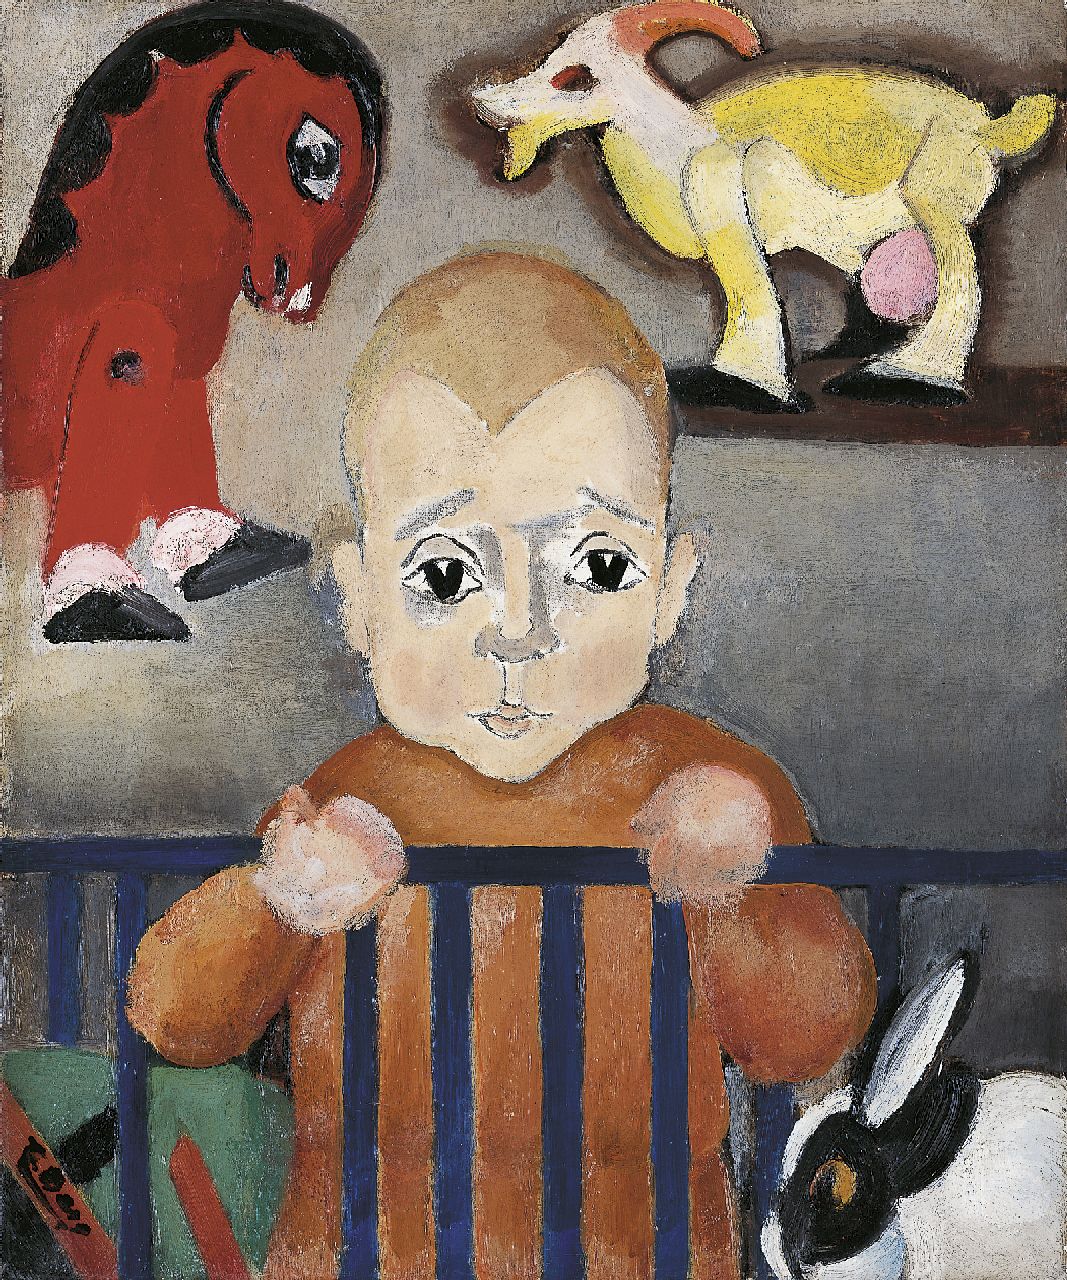 Berg E.  | Else Berg, A young boy with his toy animals, oil on canvas 46.4 x 38.5 cm, signed l.l. and painted circa 1930